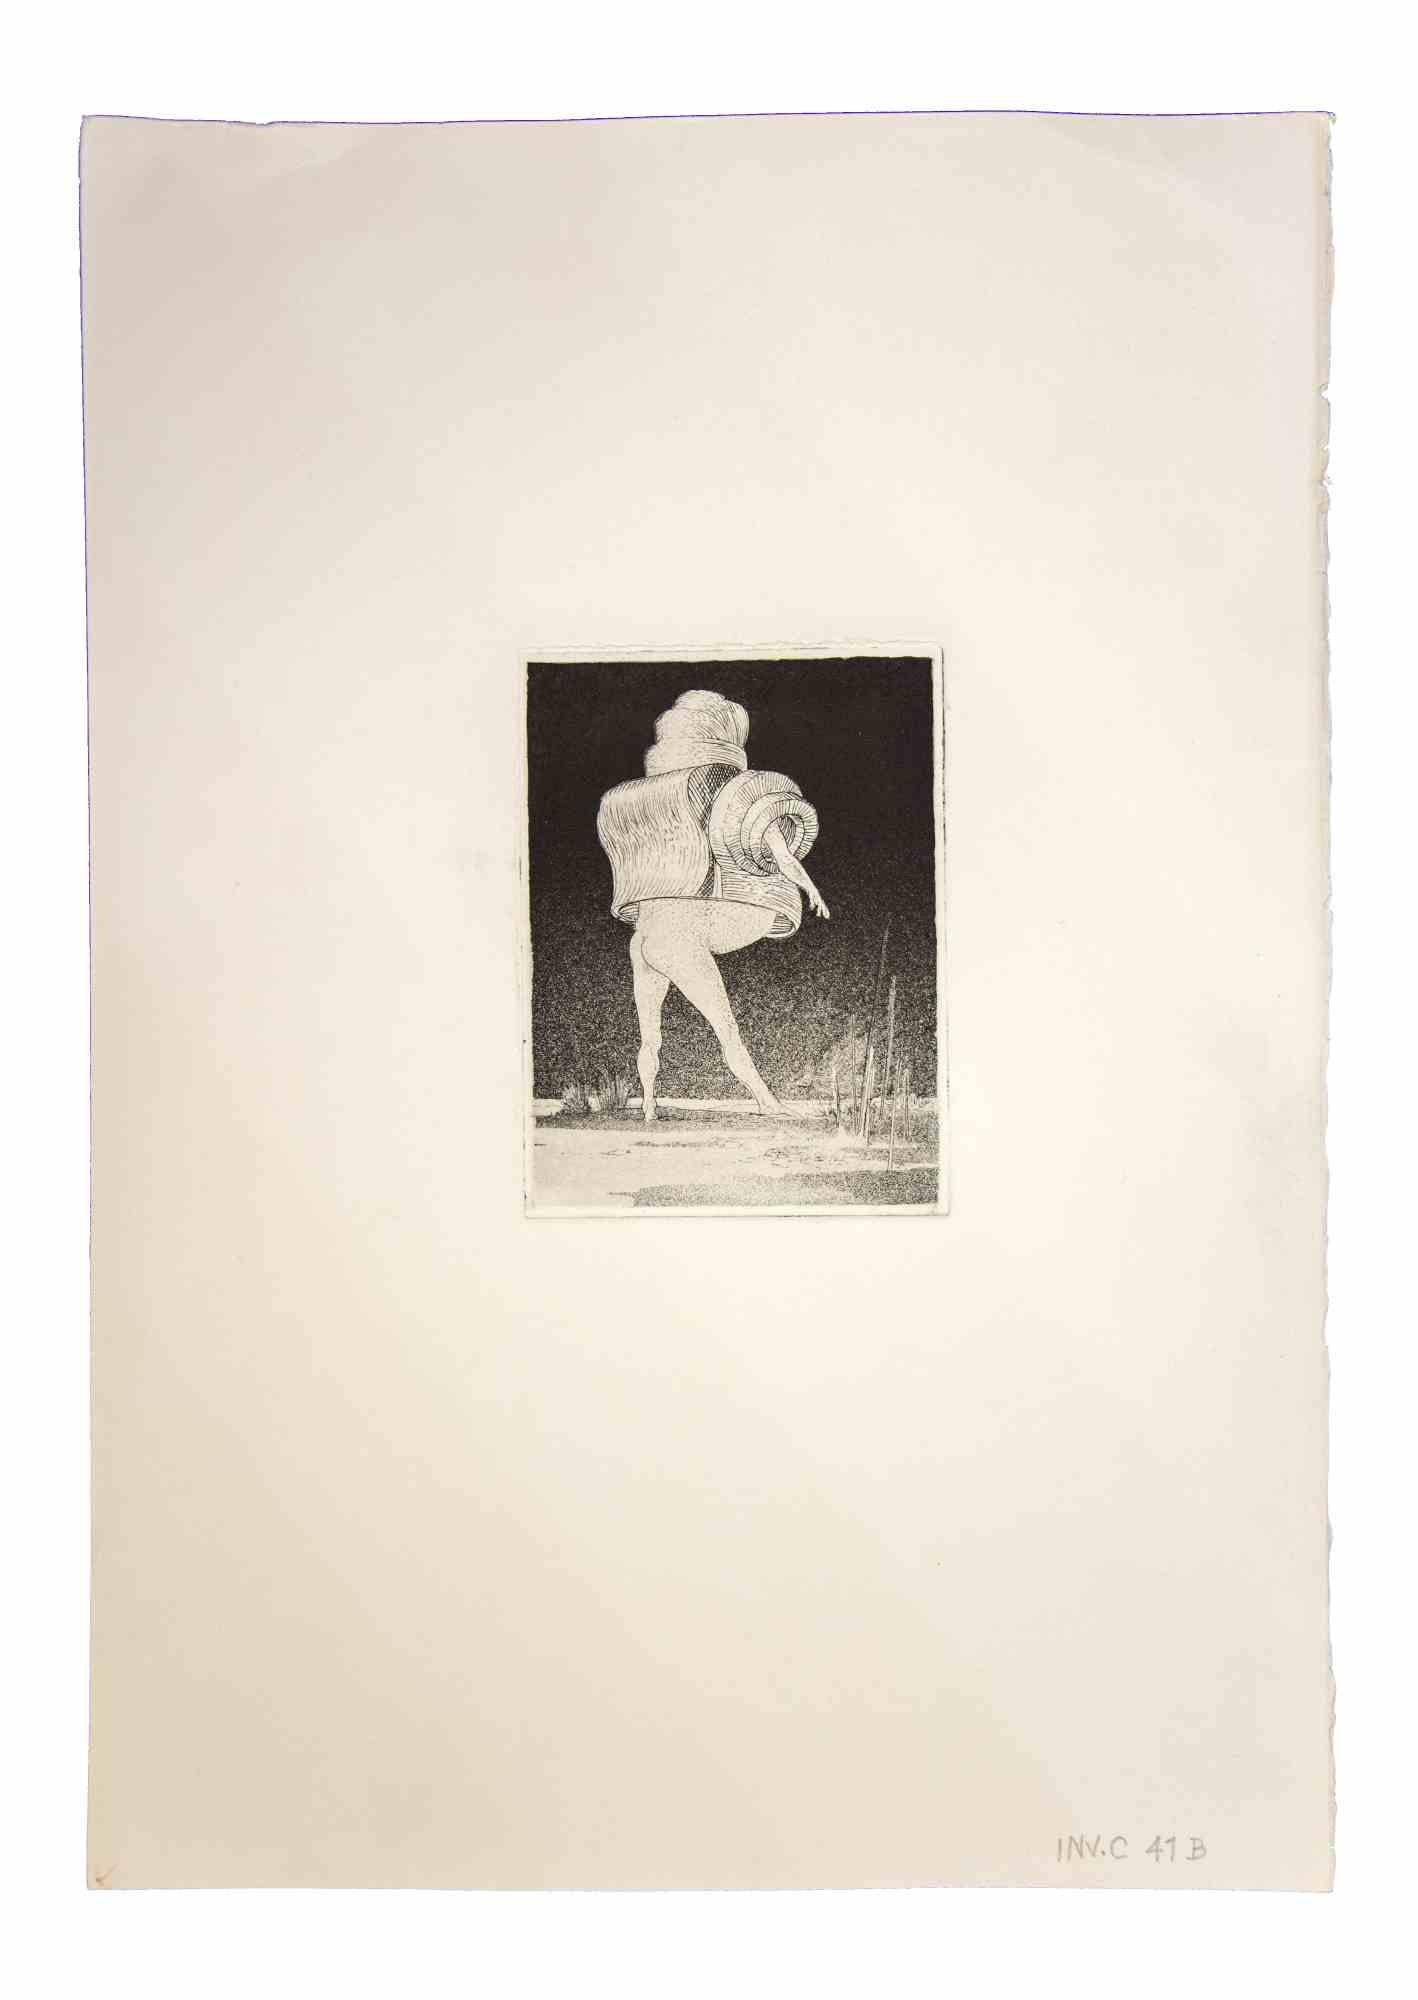 The Sentinel is an original etching realized by Leo Guida in 1970s.

Good condition.

Mounted on a white cardboard passpartout (50x35 cm).

No signature and no numbered.

Leo Guida  (1992 - 2017). Sensitive to current issues, artistic movements and